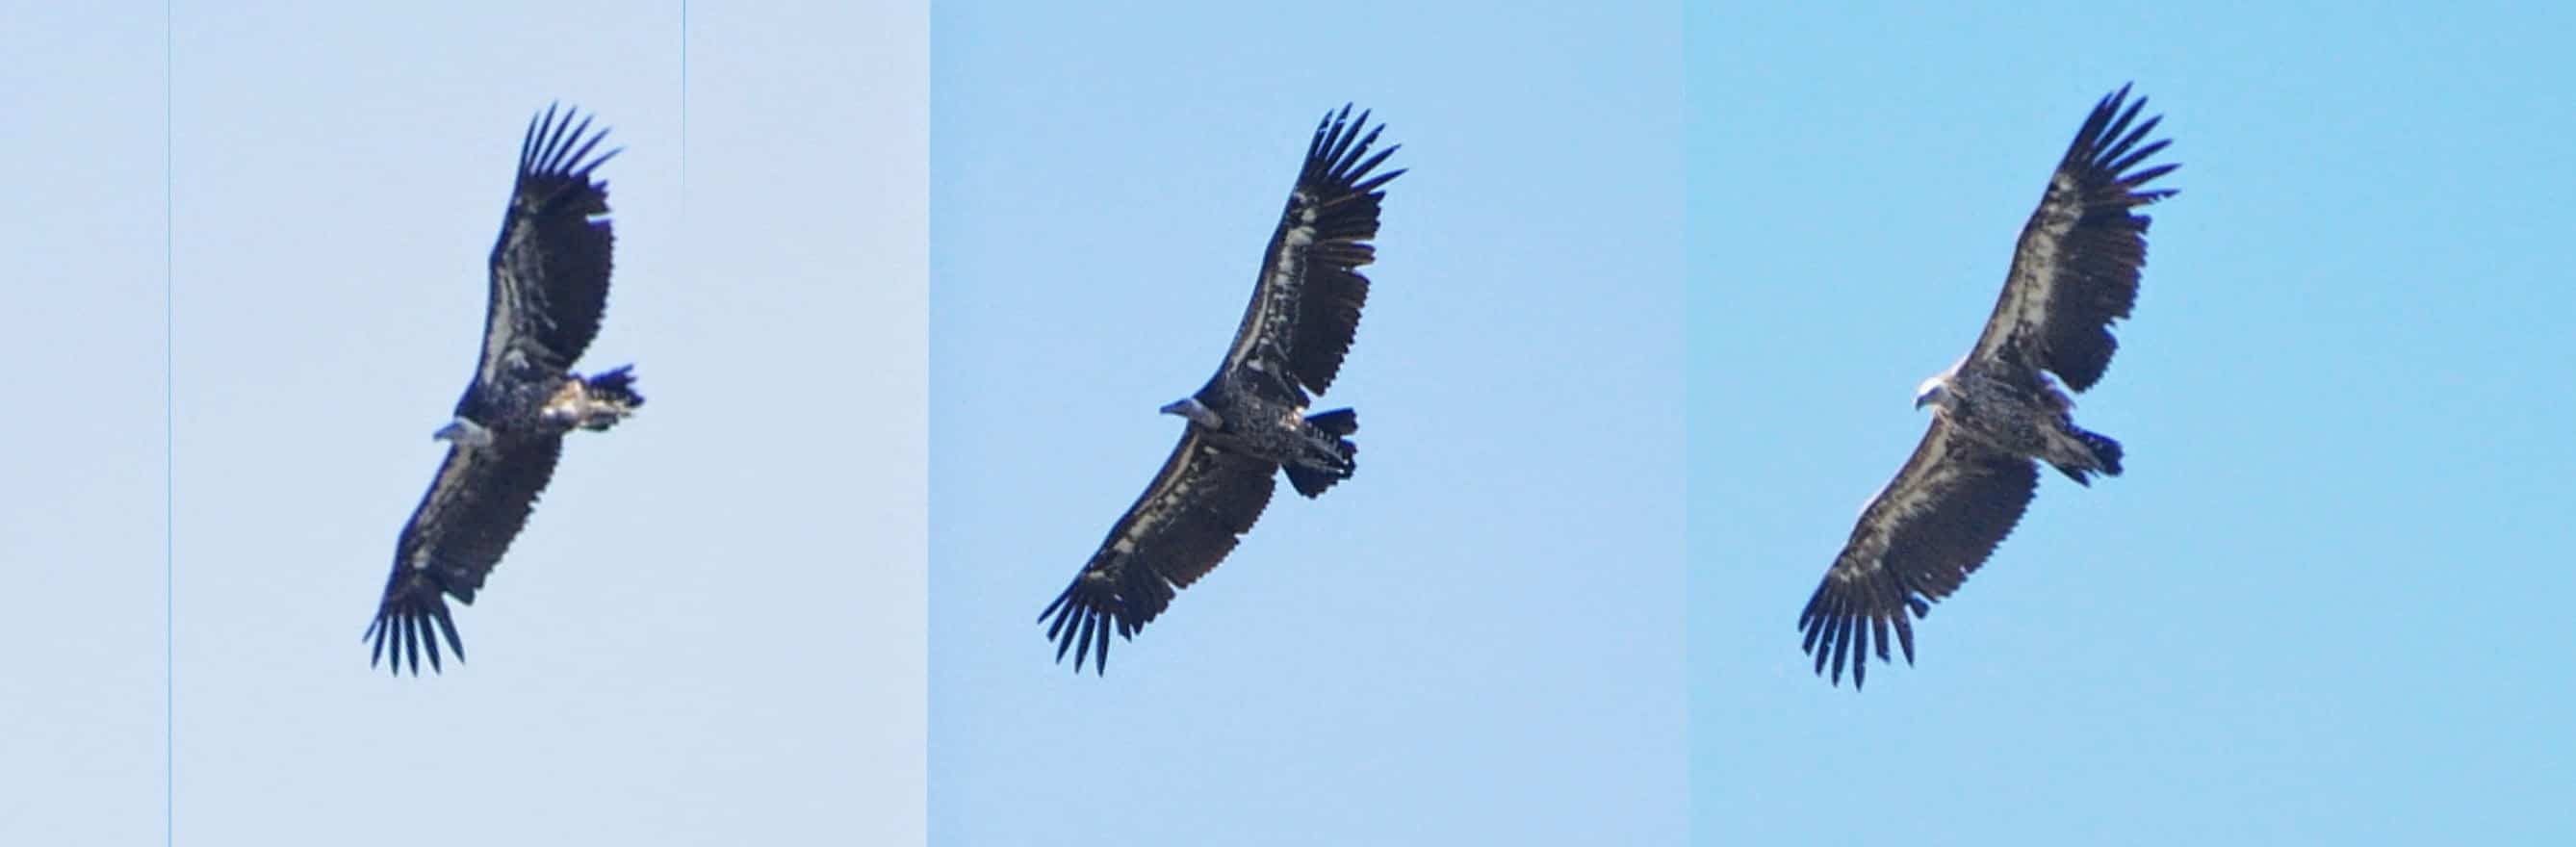 3 different Rüppell’s Vultures observed at Jbel Bouhachem, northern Morocco